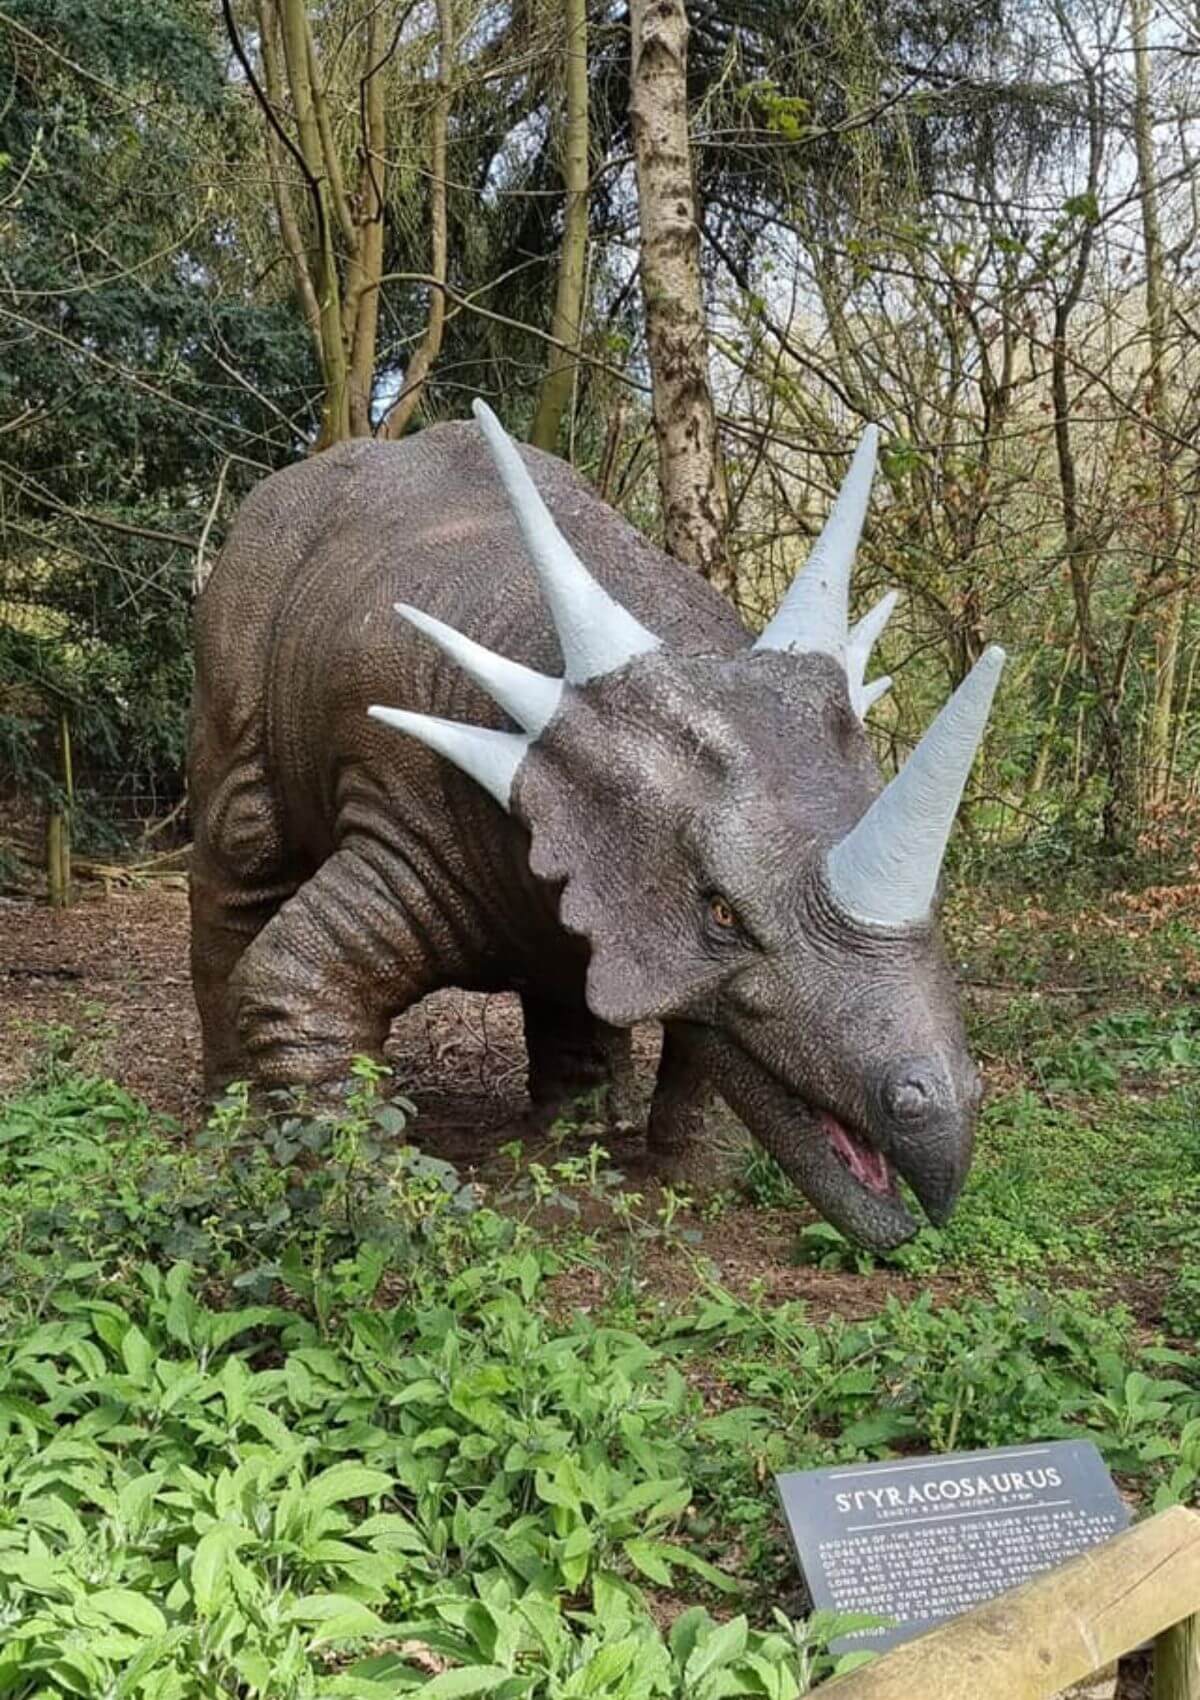 Dinosaur day out at Knebworth House, England